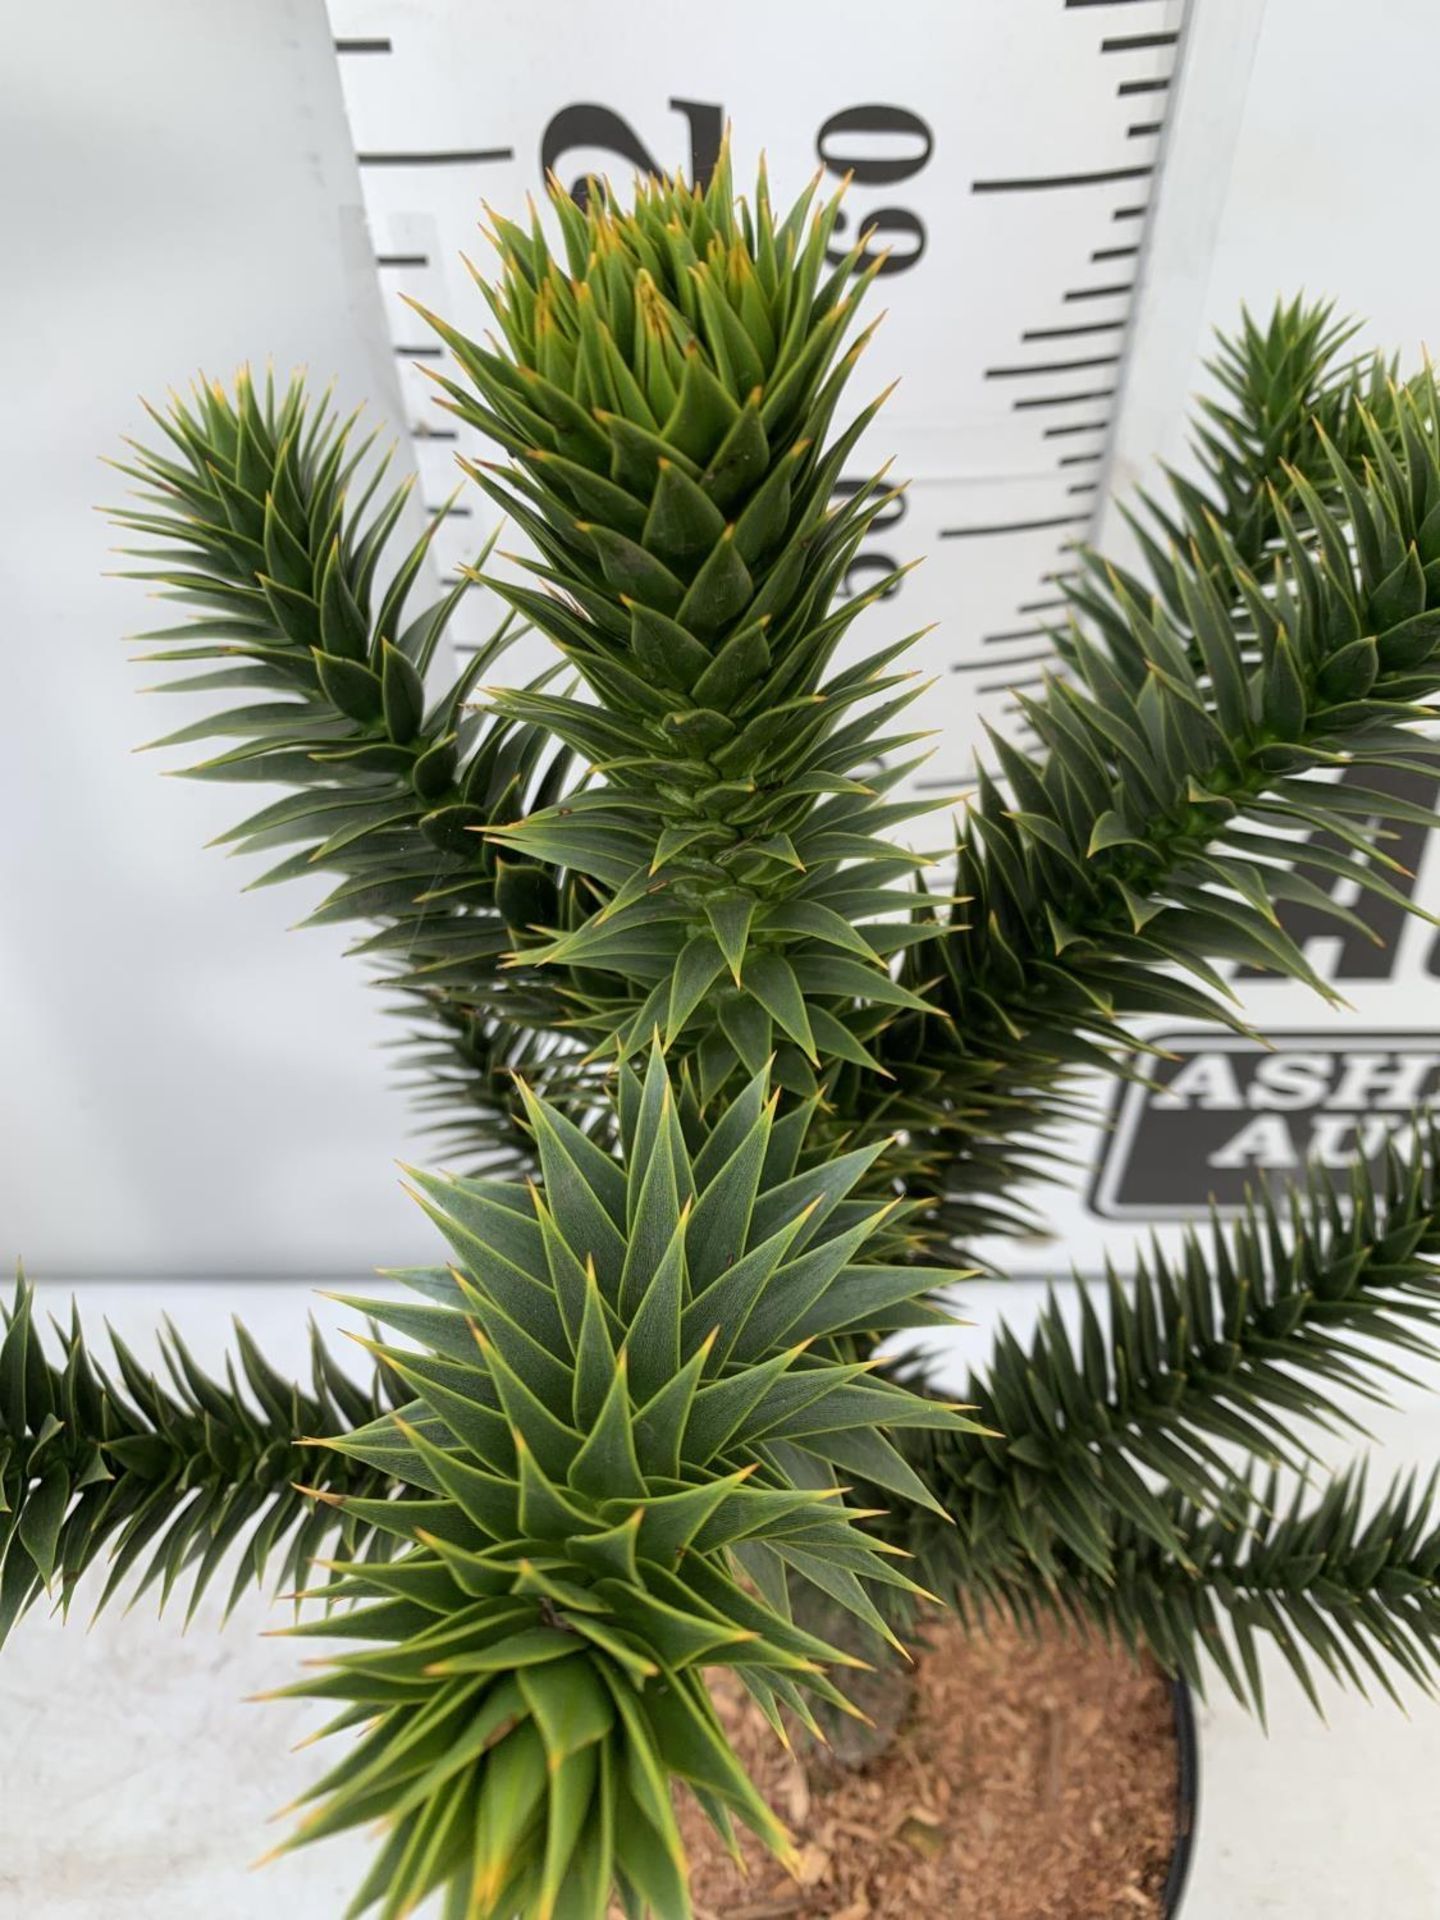 ONE MONKEY PUZZLE TREE ARAUCARIA ARAUCANA APPROX 70CM IN HEIGHT IN A 5 LTR POT PLUS VAT - Image 3 of 4